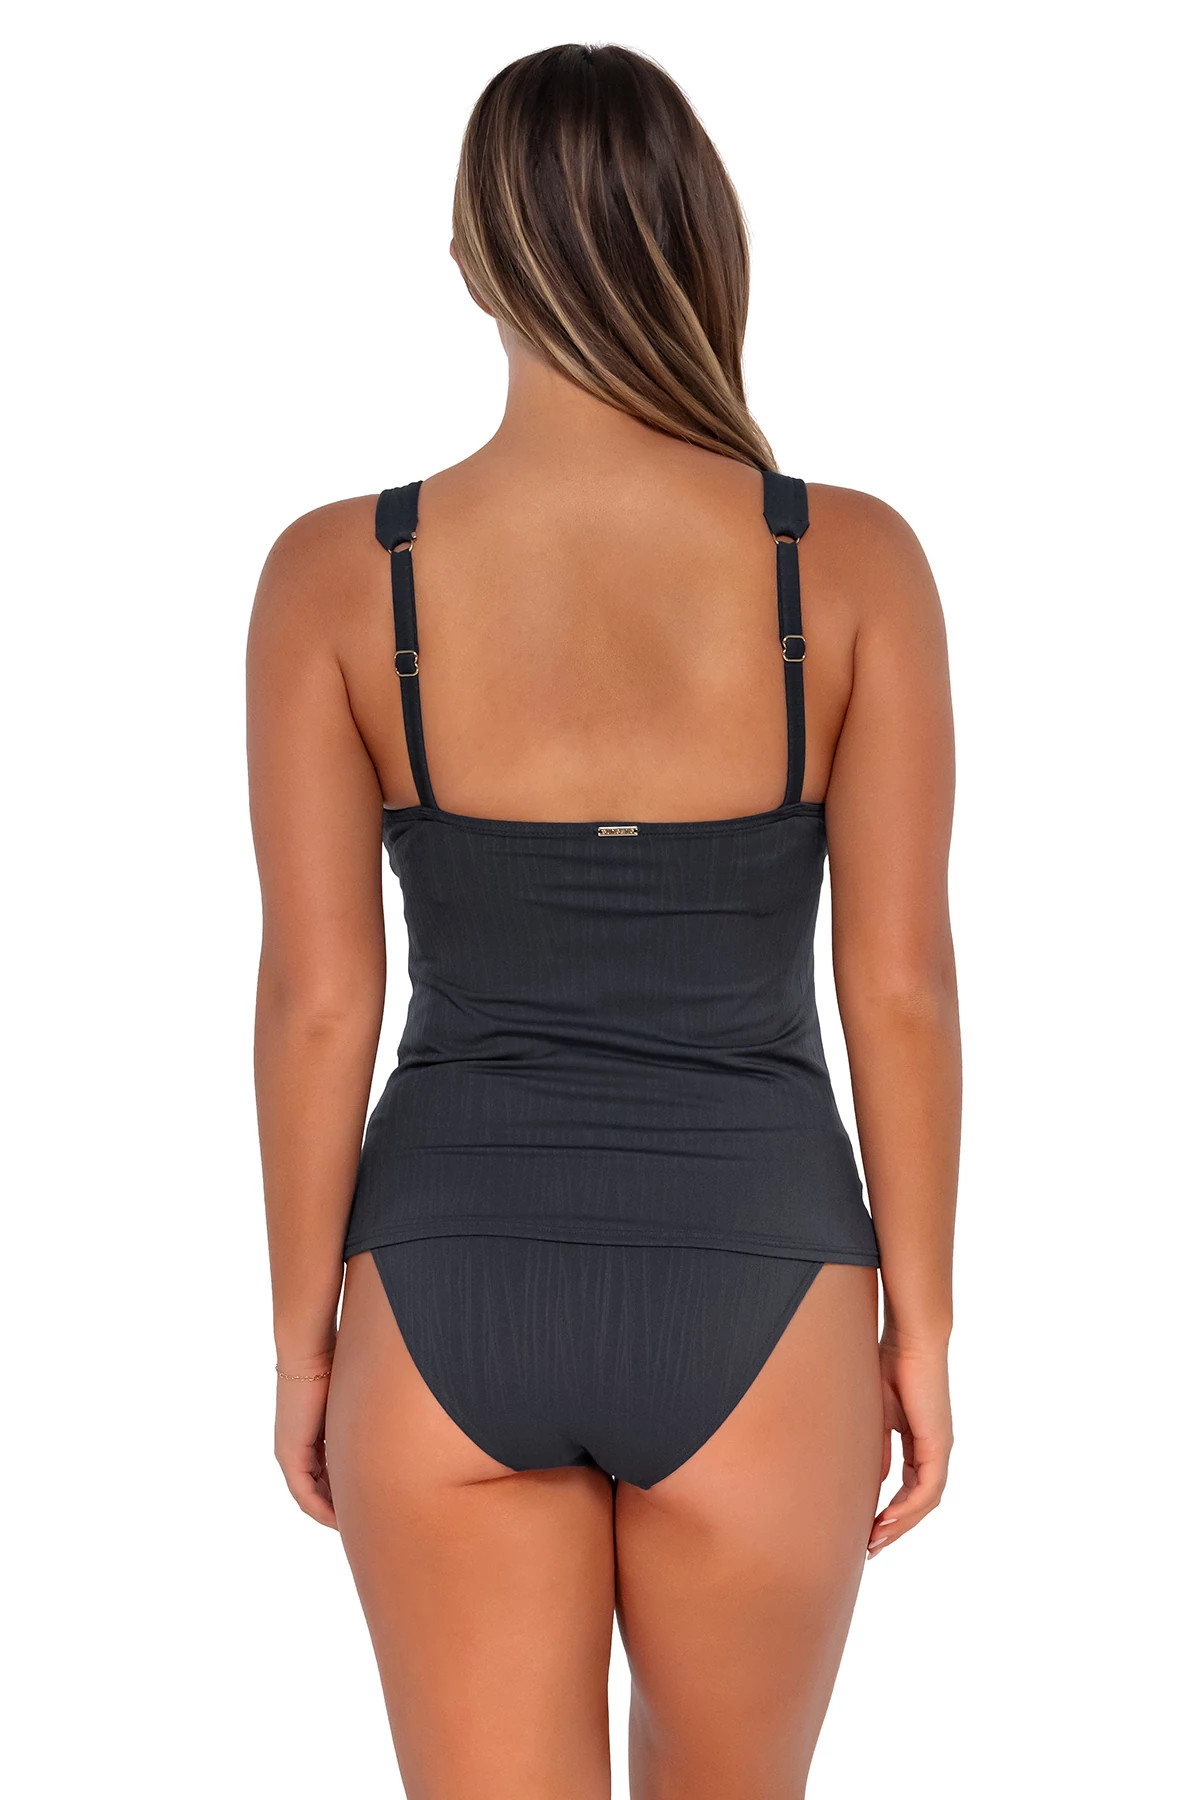 SLATE SEAGRASS TEXTURE Elsie Underwire Tankini Top (E-H Cup) image number 2